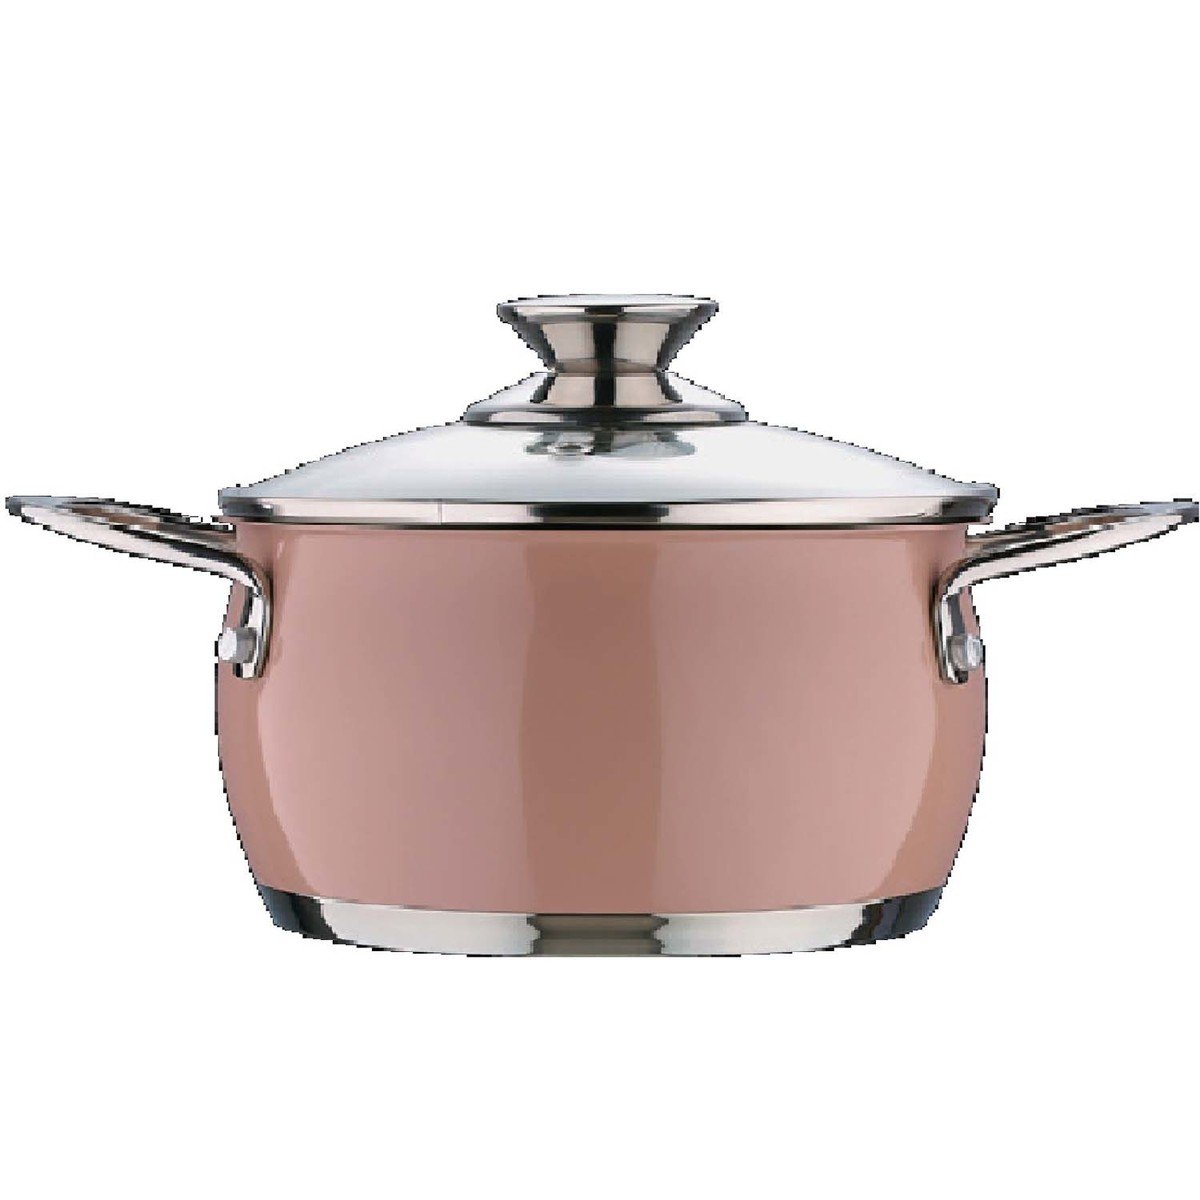 Bergner Stainless Steel Casserole 18cm Assorted Colors